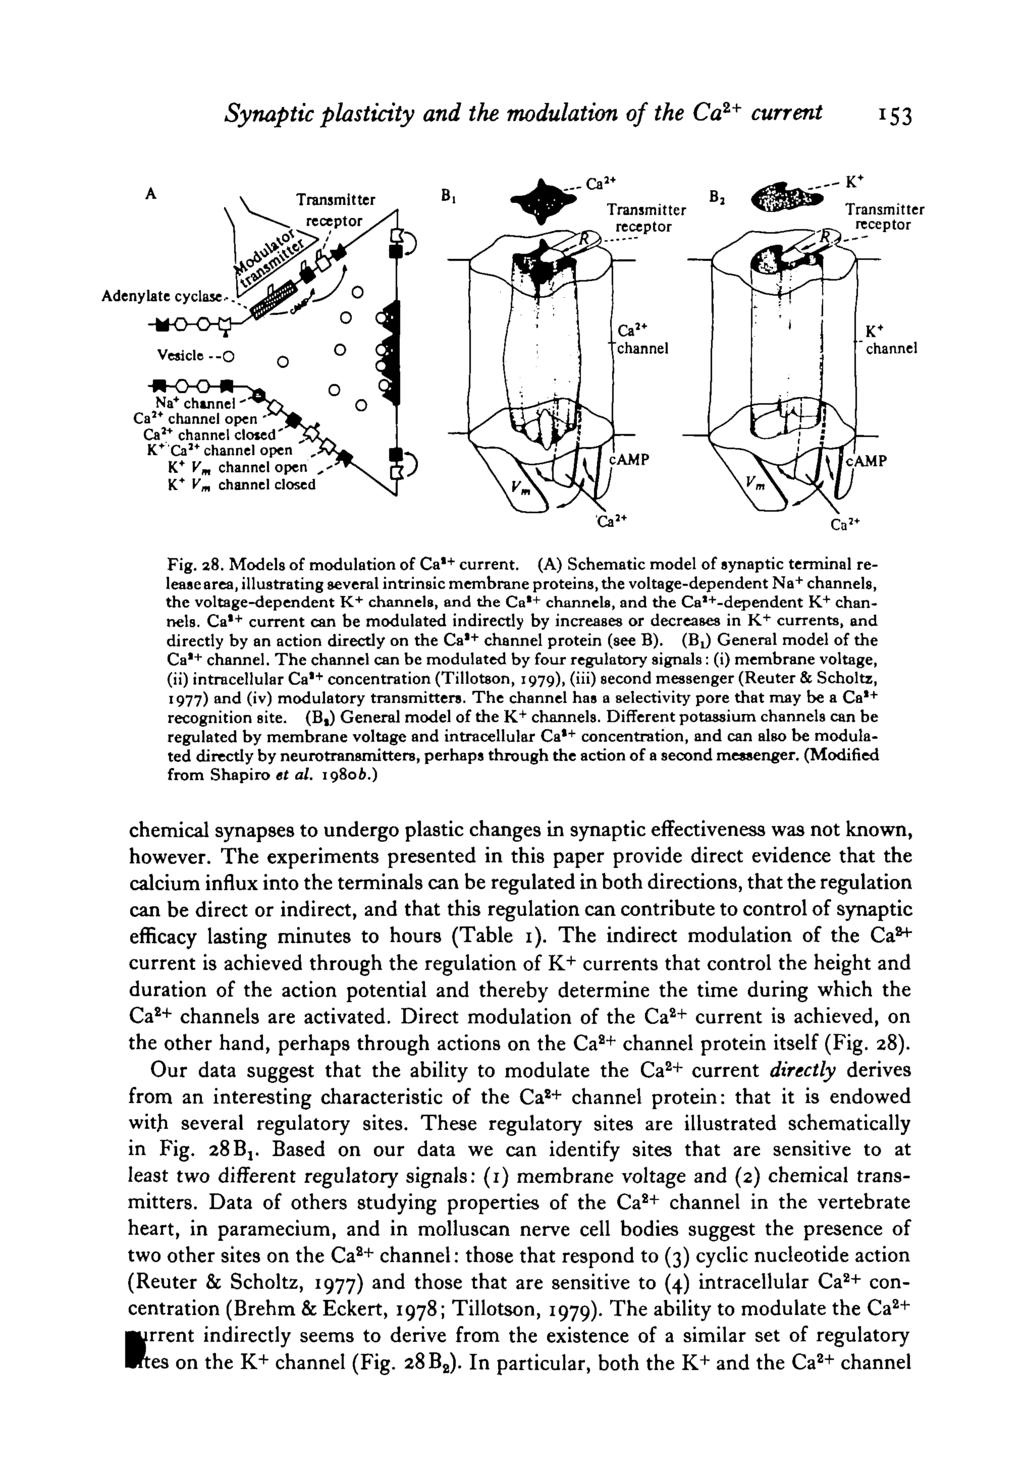 Synoptic plasticity and the modulation of the Ca 2+ current 153 Transmitter»i receptor Transmitter receptor Transmitter receptor channel Na* chinnel Ca 2 * channel open ' Ca 2 * channel cloied' K* Ca